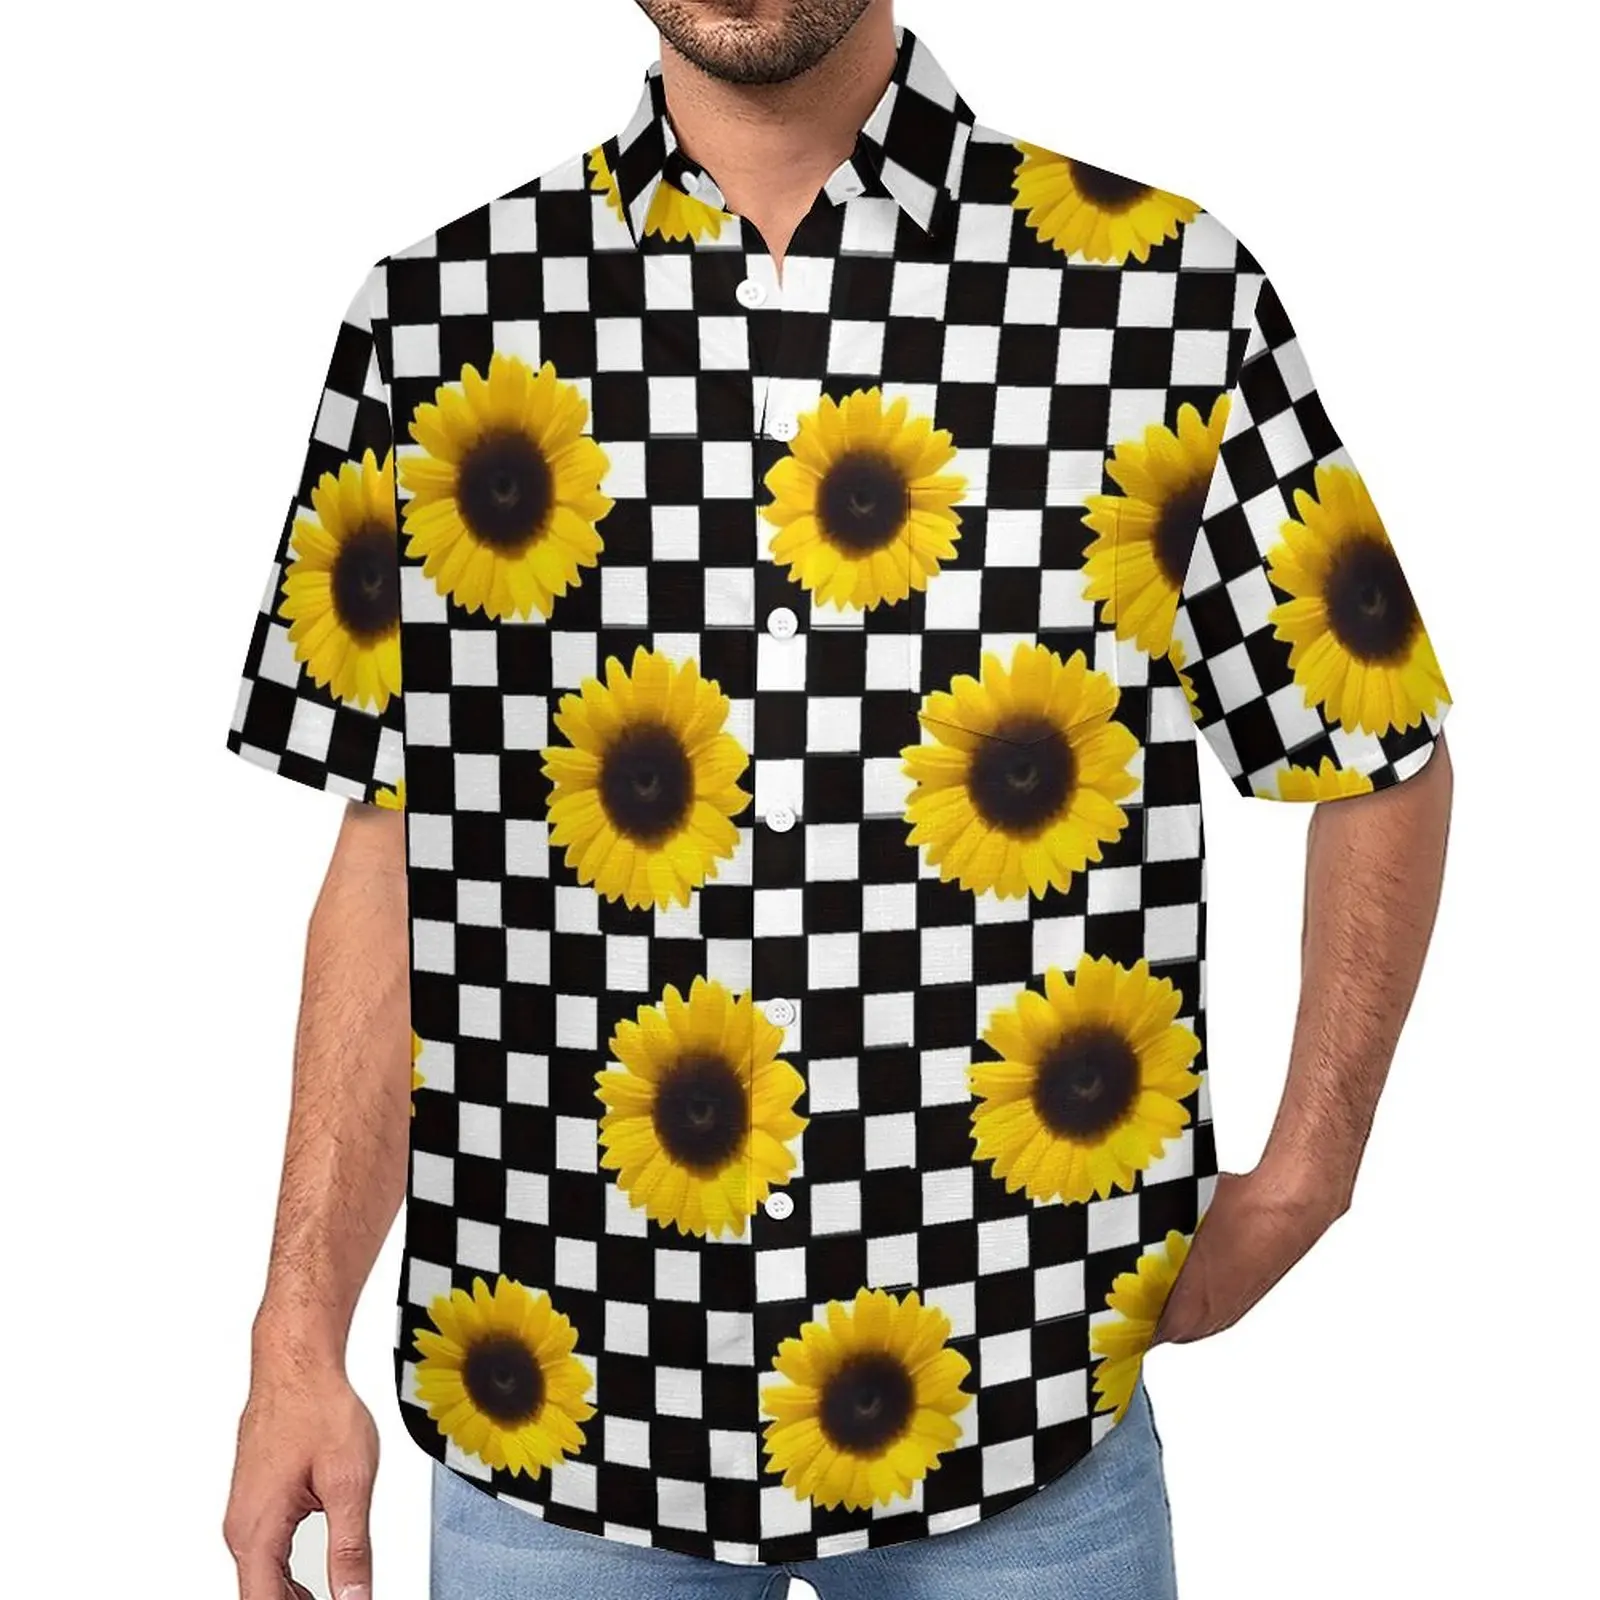 

Sunflower Blouses Male Black And White Check Casual Shirts Hawaiian Short-Sleeved Pattern Street Style Oversized Beach Shirt